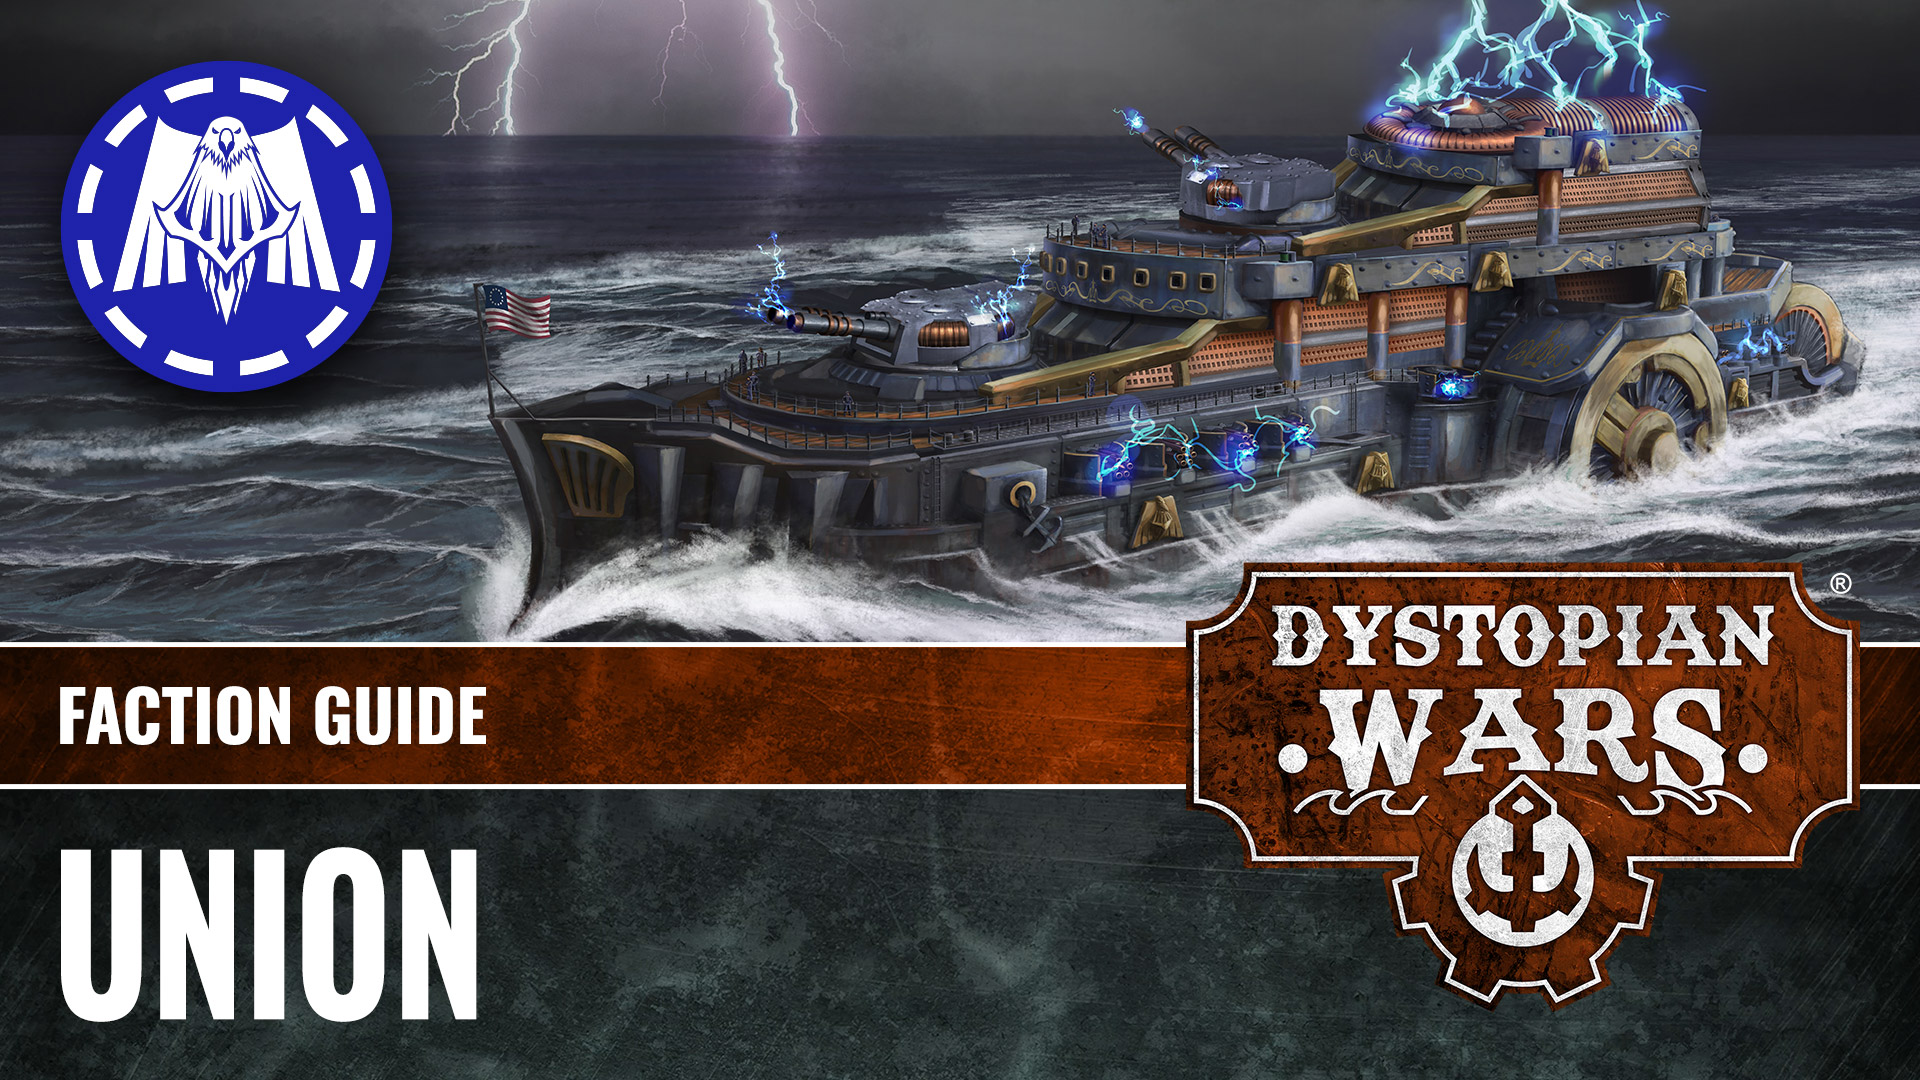 UNION-Lore-Of-Dystopian-Wars-Faction-Guide